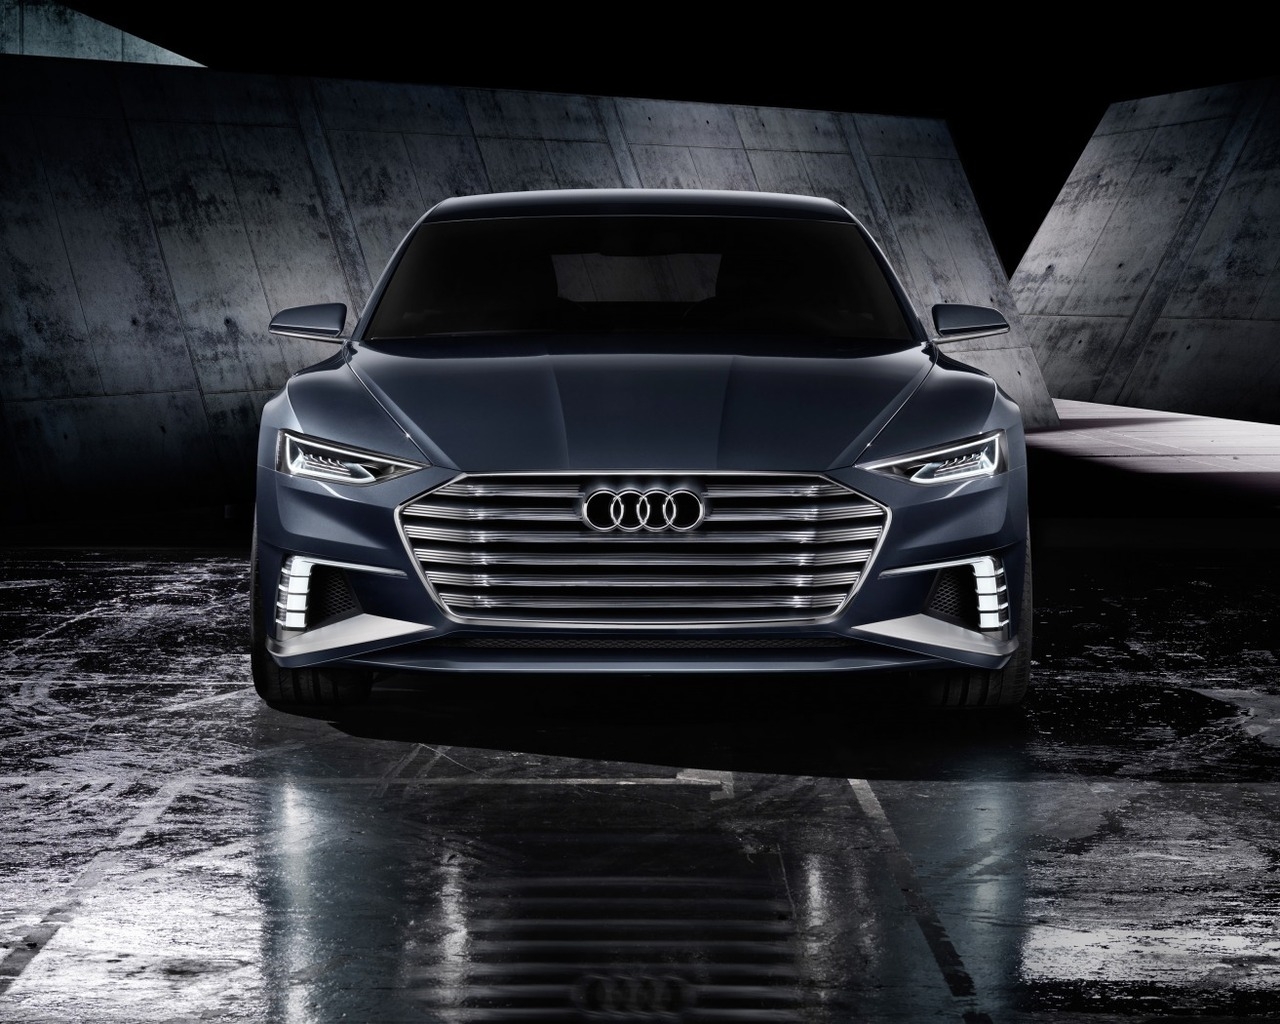 Audi Prologue Avant Front View for 1280 x 1024 resolution